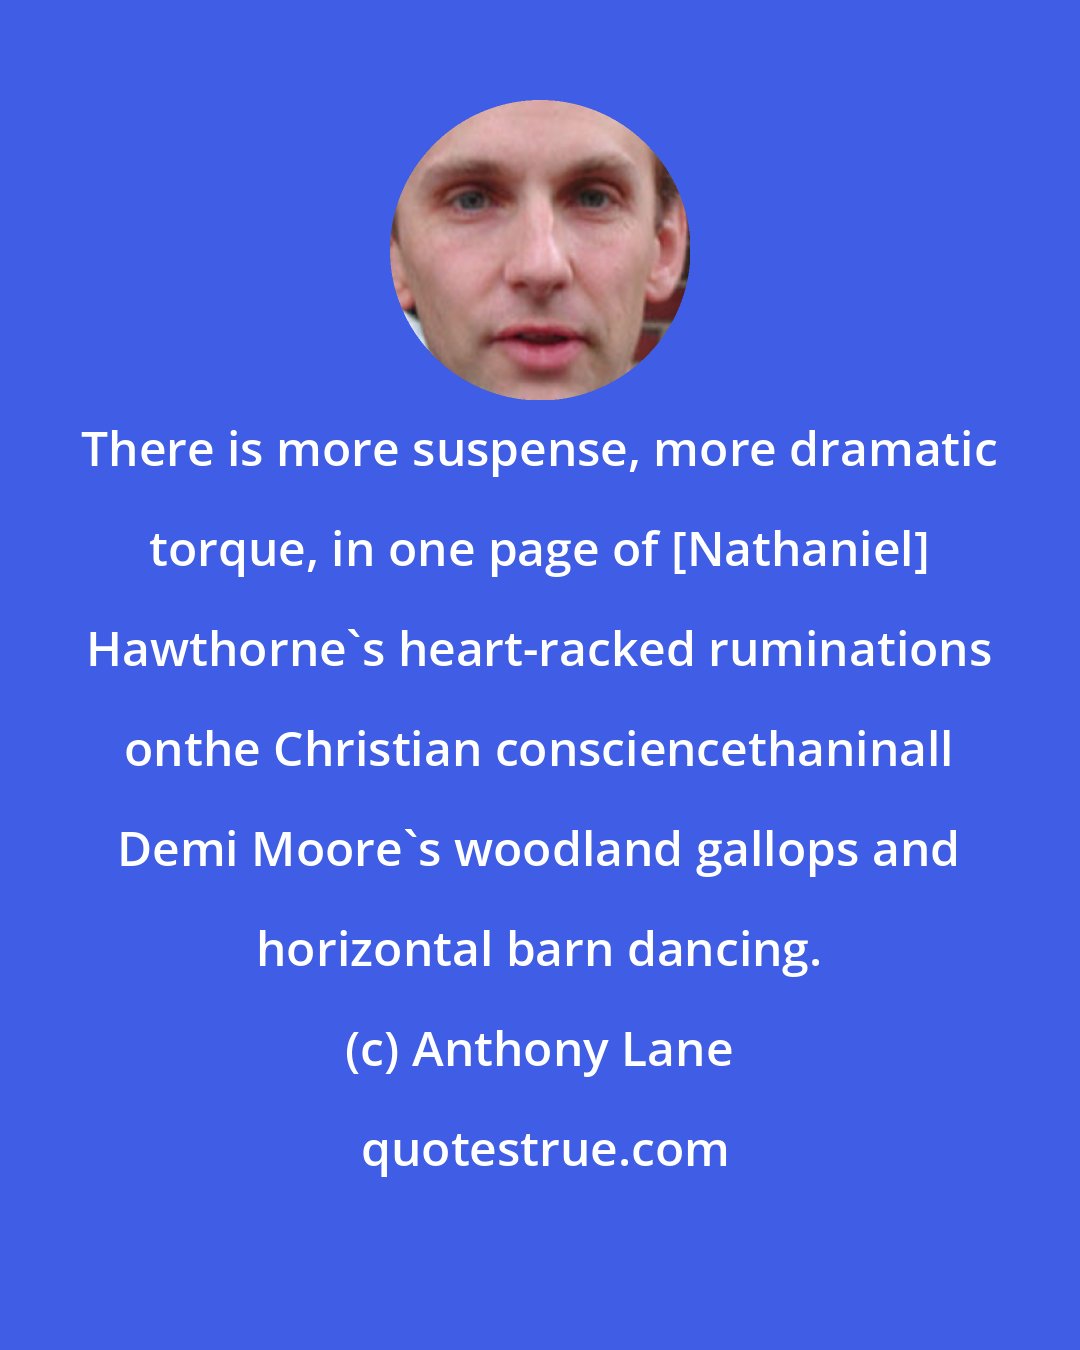 Anthony Lane: There is more suspense, more dramatic torque, in one page of [Nathaniel] Hawthorne's heart-racked ruminations onthe Christian consciencethaninall Demi Moore's woodland gallops and horizontal barn dancing.